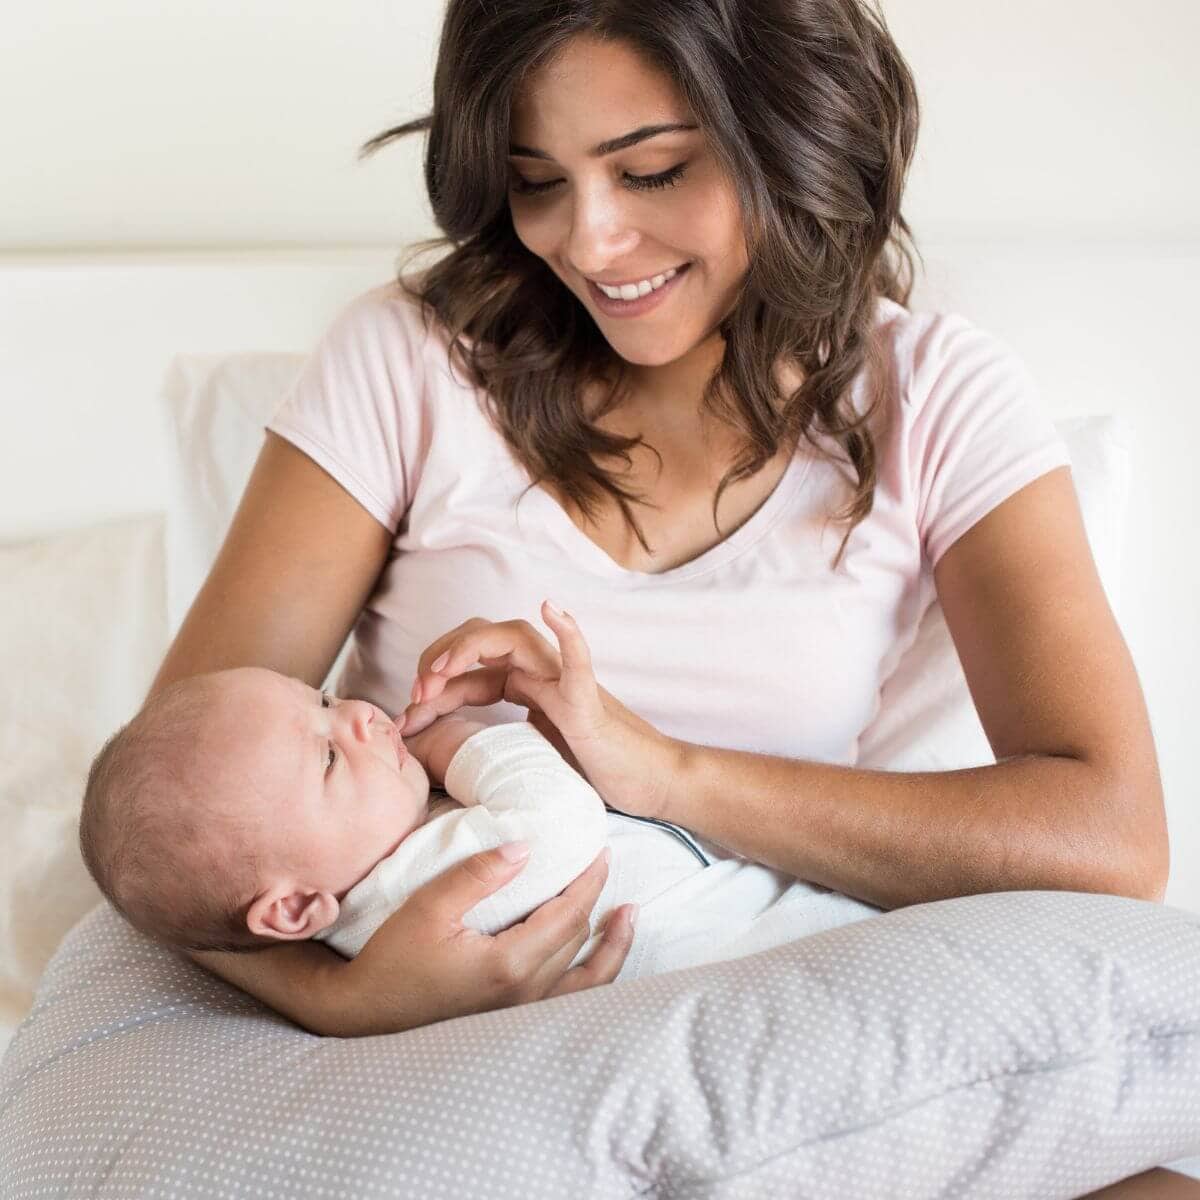 A woman in a white shirt is sitting on a bed. She has a light grey nursing pillow with white polka dots in her lap while a baby lays on it.